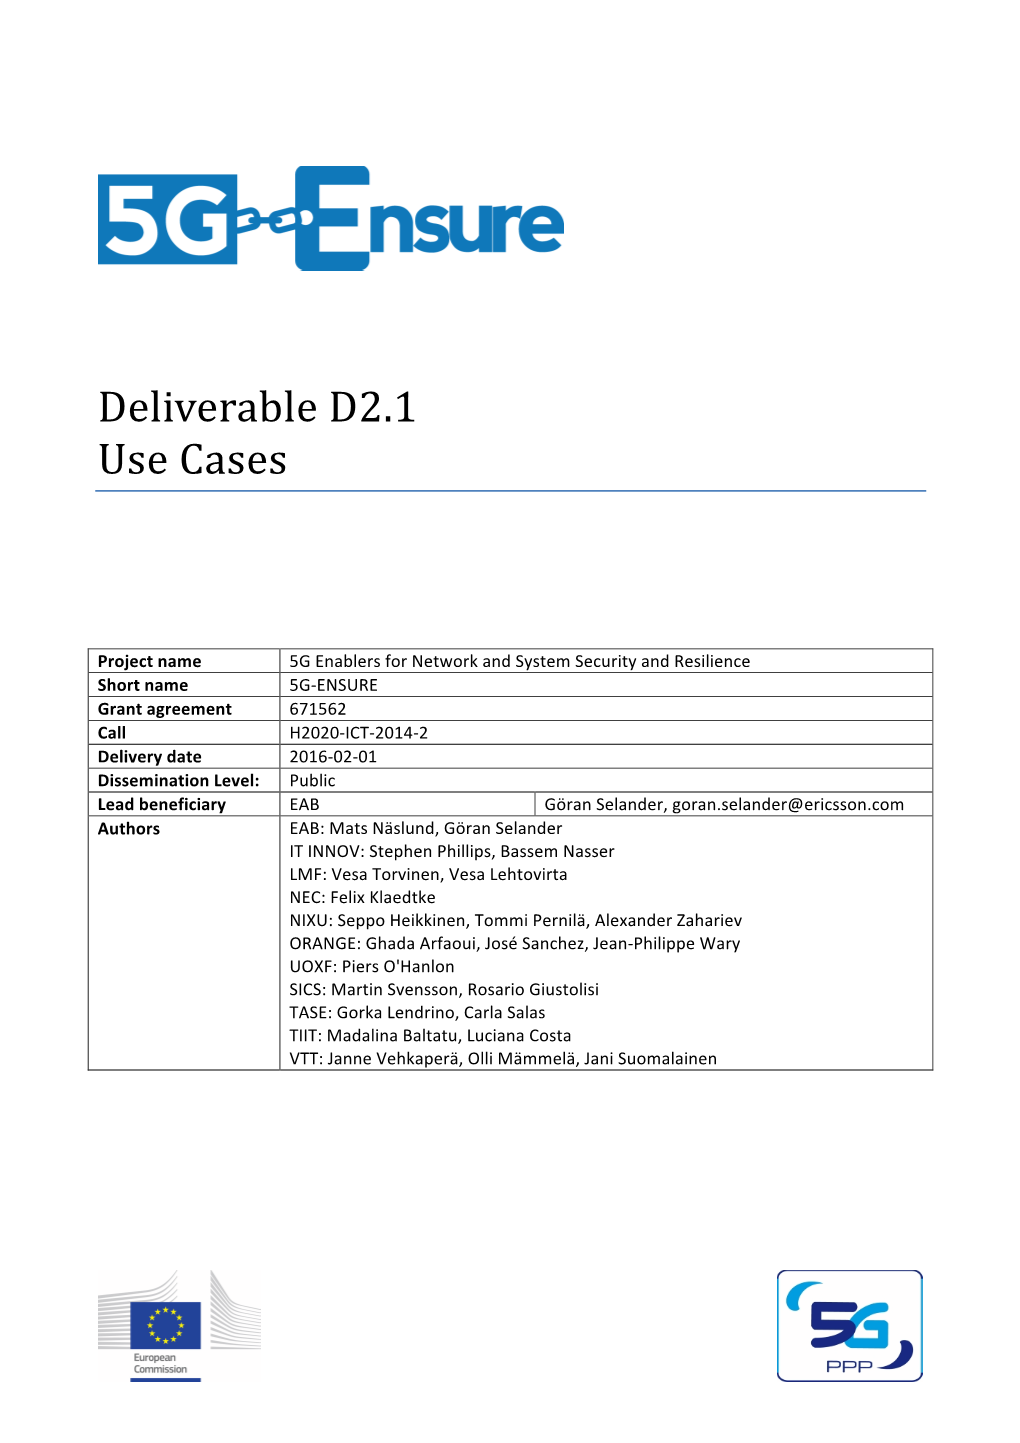 Deliverable D2.1 Use Cases